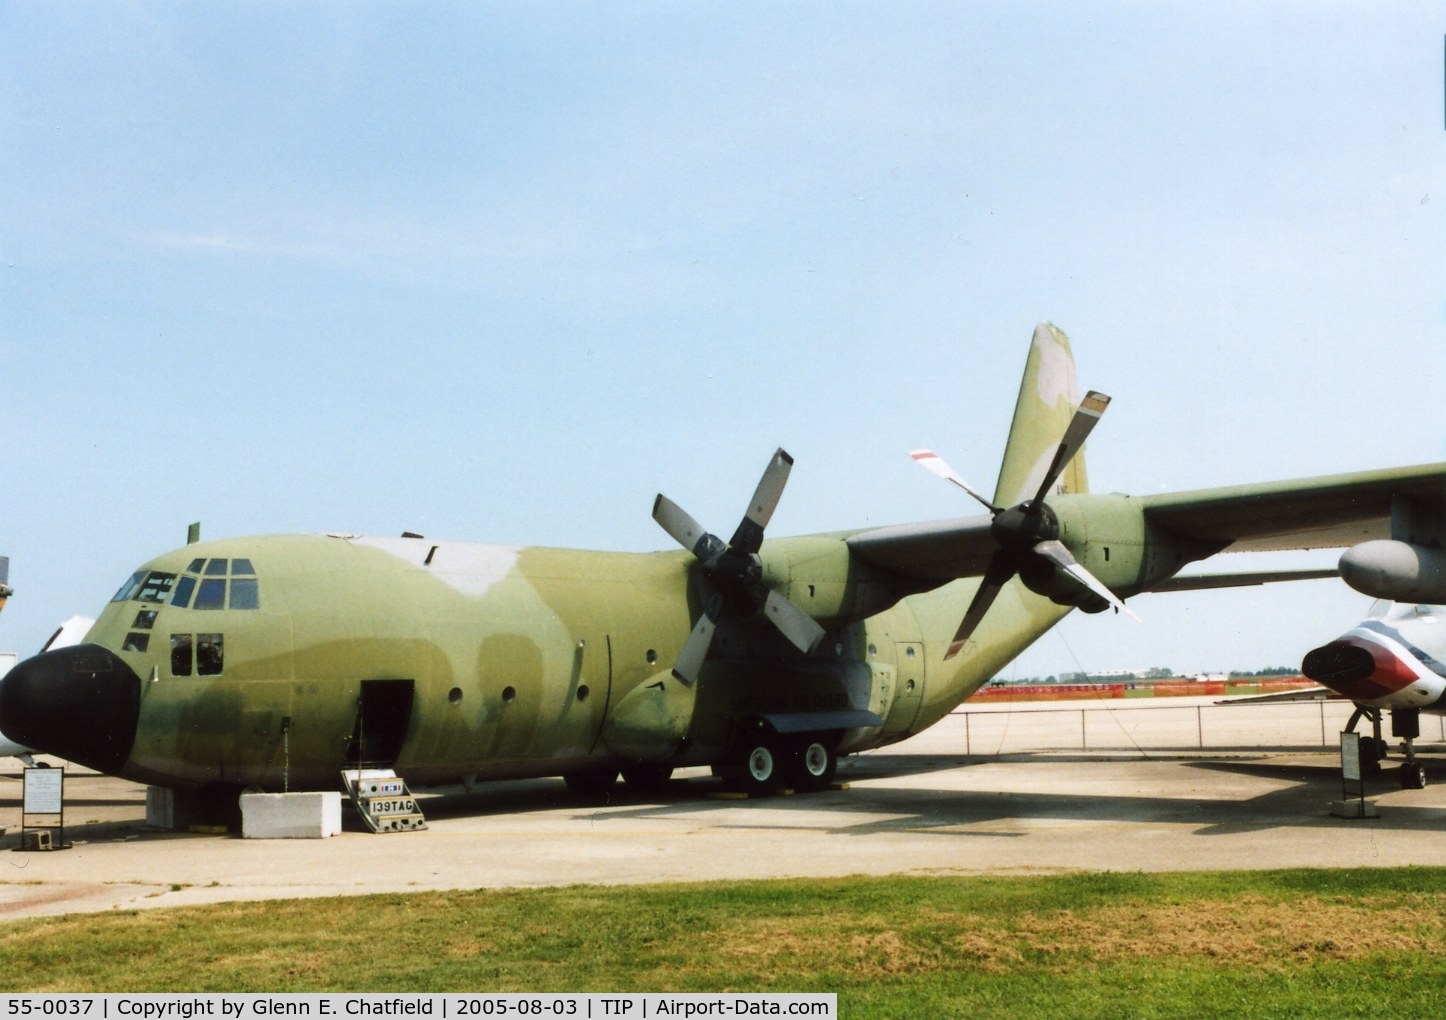 55-0037, 1955 Lockheed C-130A-LM Hercules C/N 182-3064, C-130A at the Octave Chanute Aviation Center